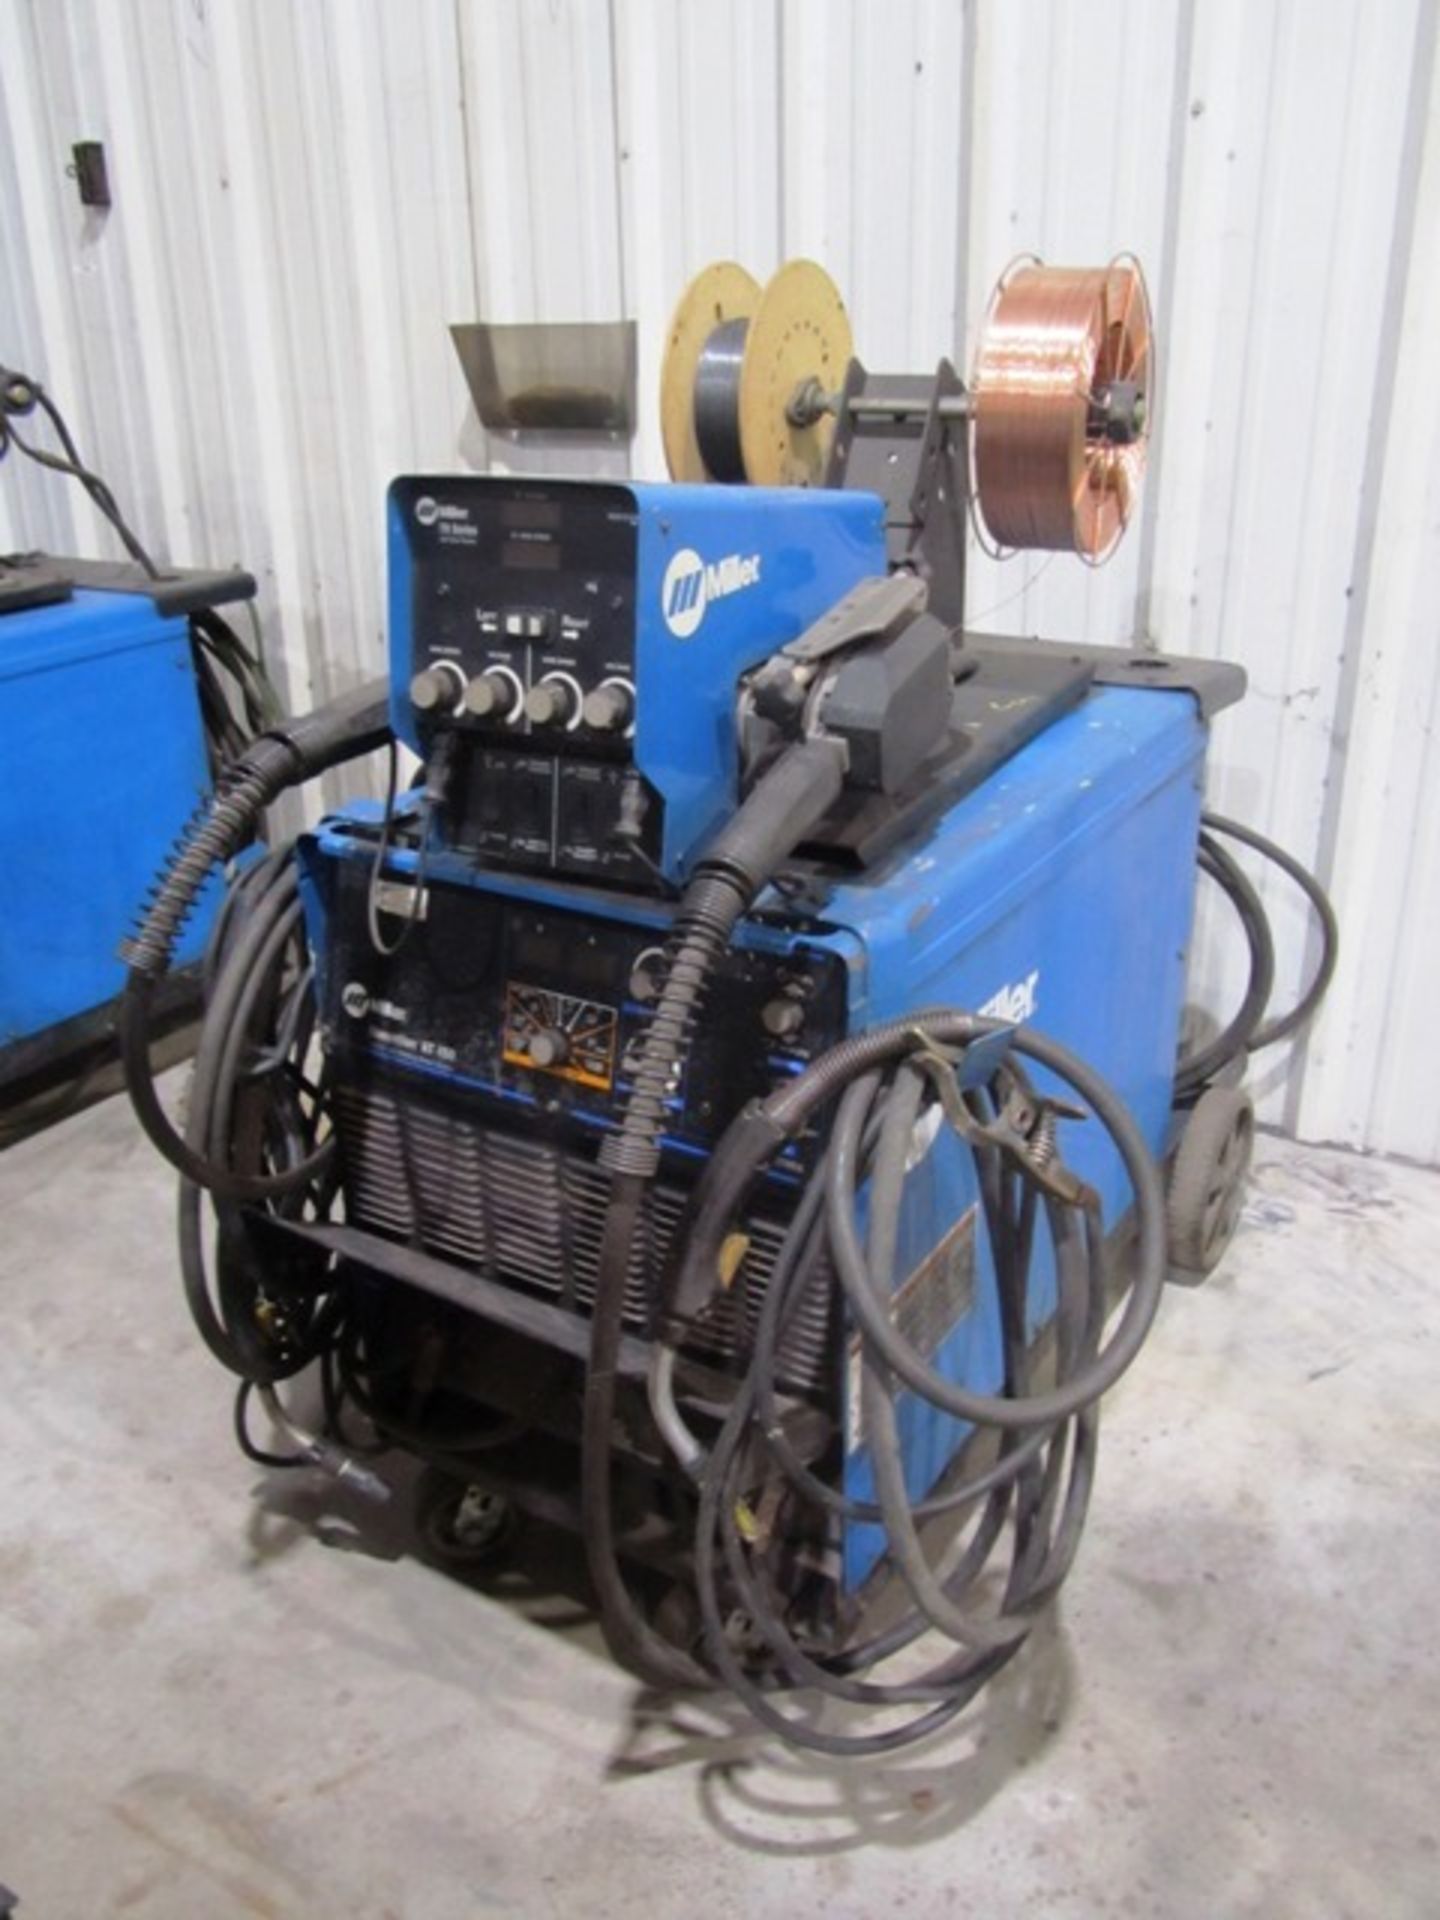 Miller Dimension NT450 Portable Mig Welder with Miller 70 Series Dual Wire Feeder